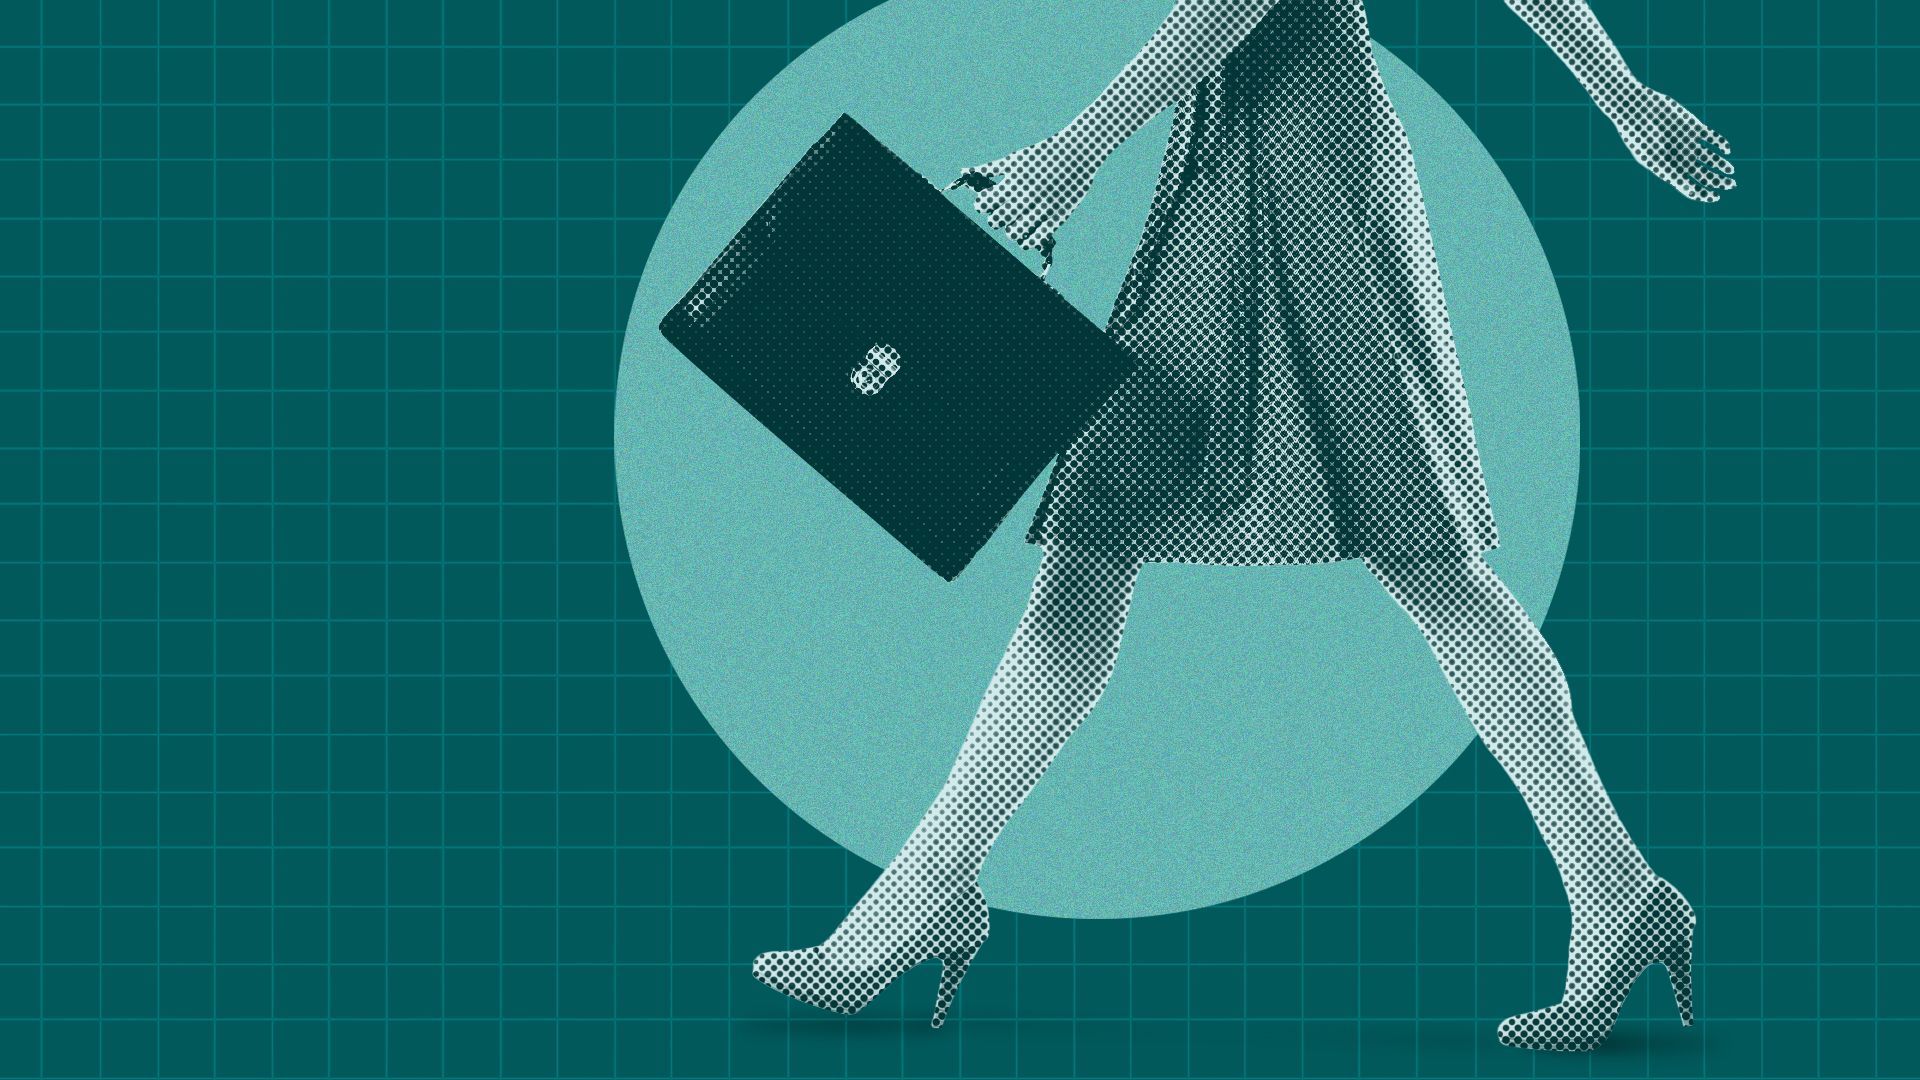 an illustration of a person with a briefcase walking in front of a teal background with graph paper overlay